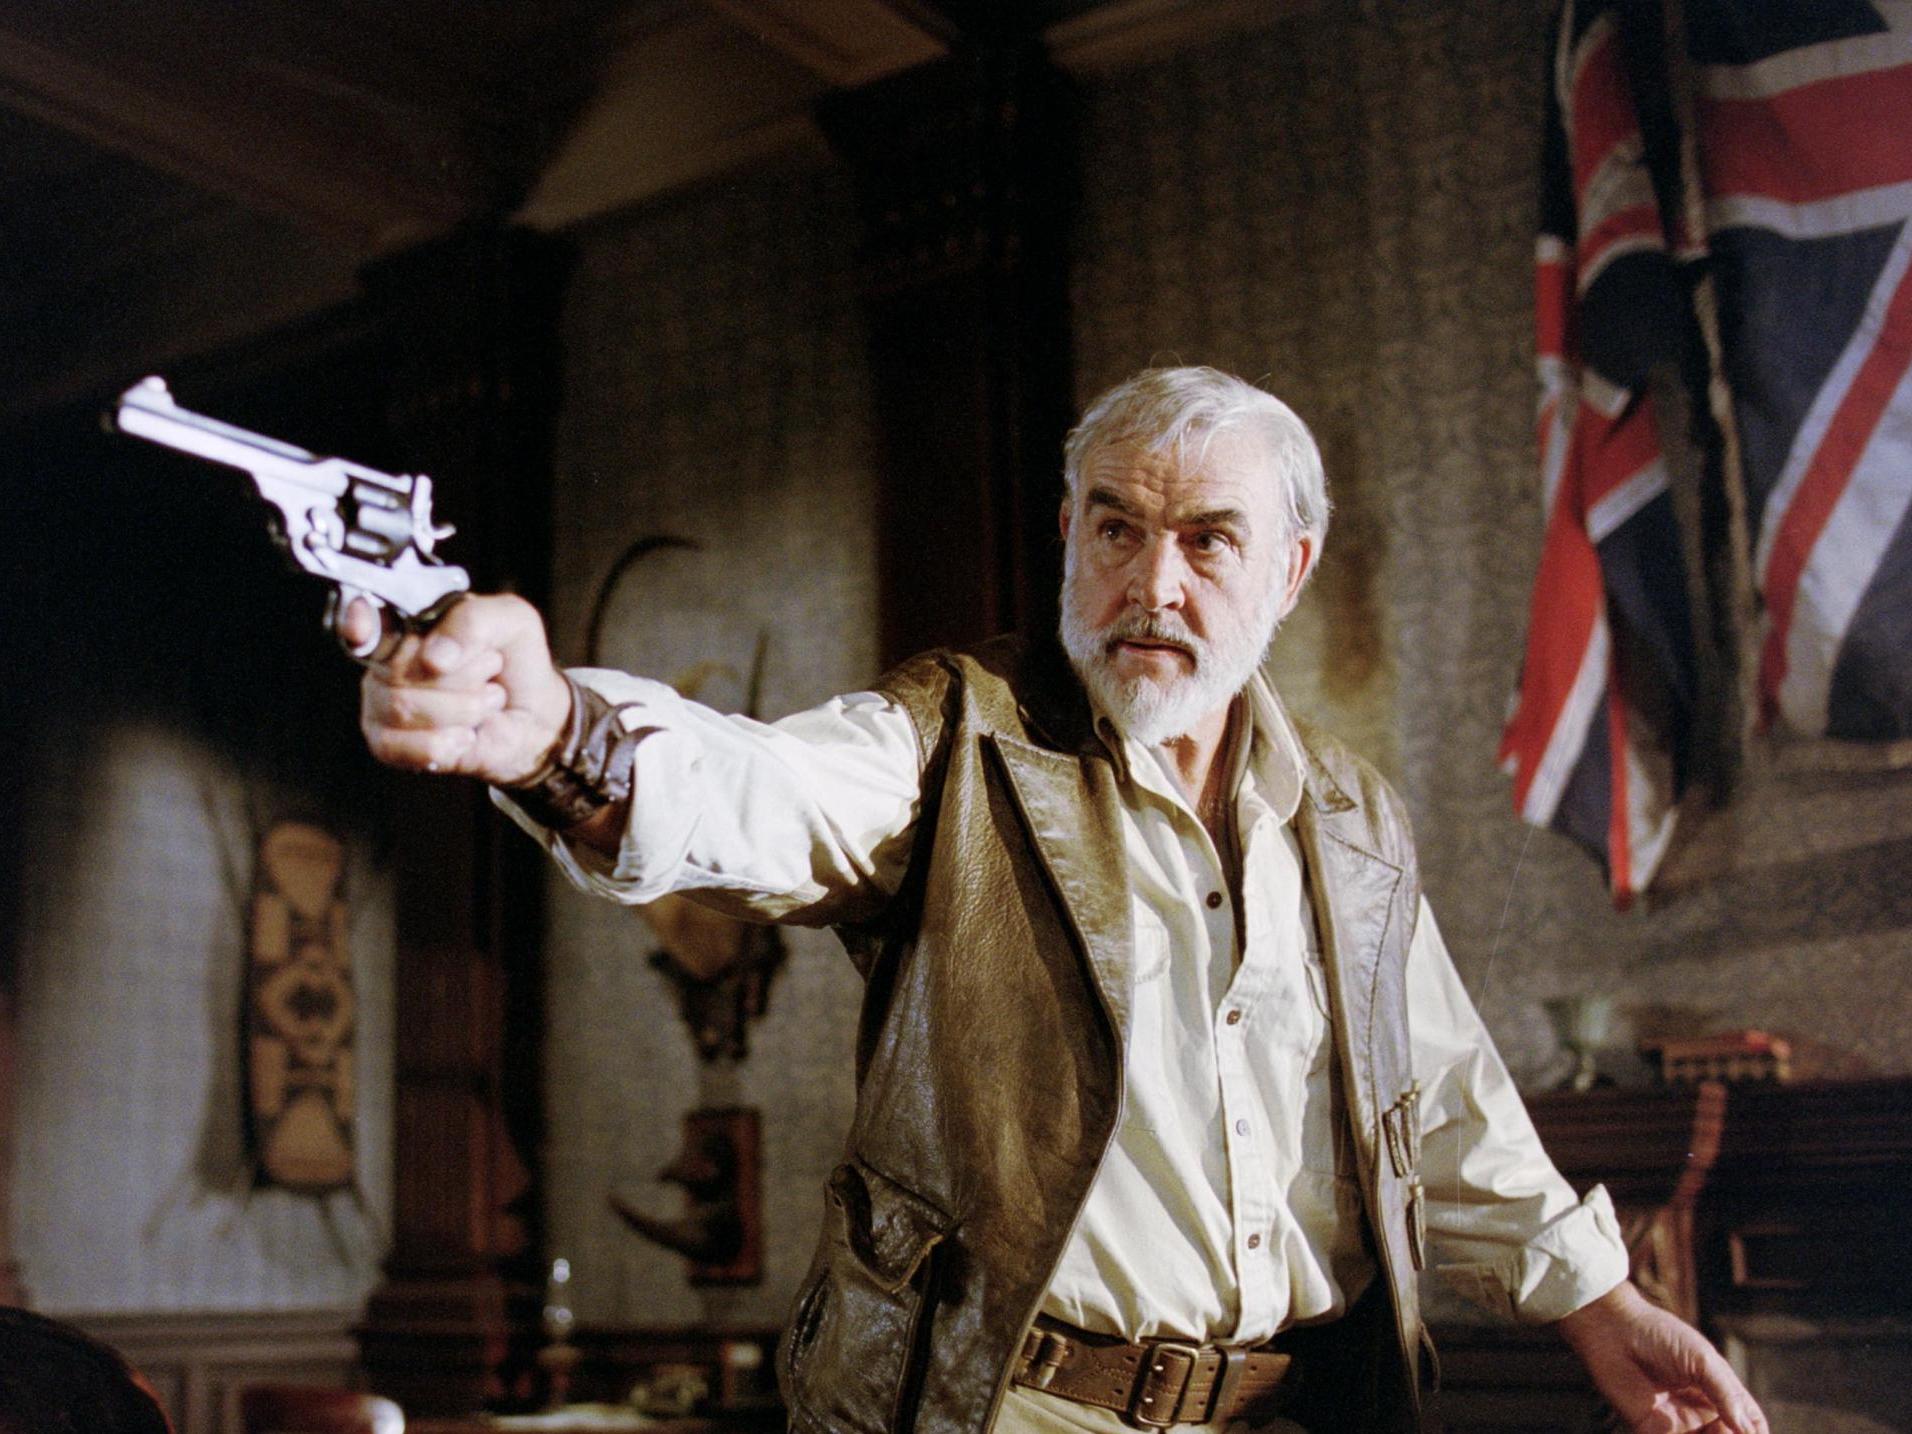 Sean Connery in 2003 flop ‘The League of Extraordinary Gentlemen’